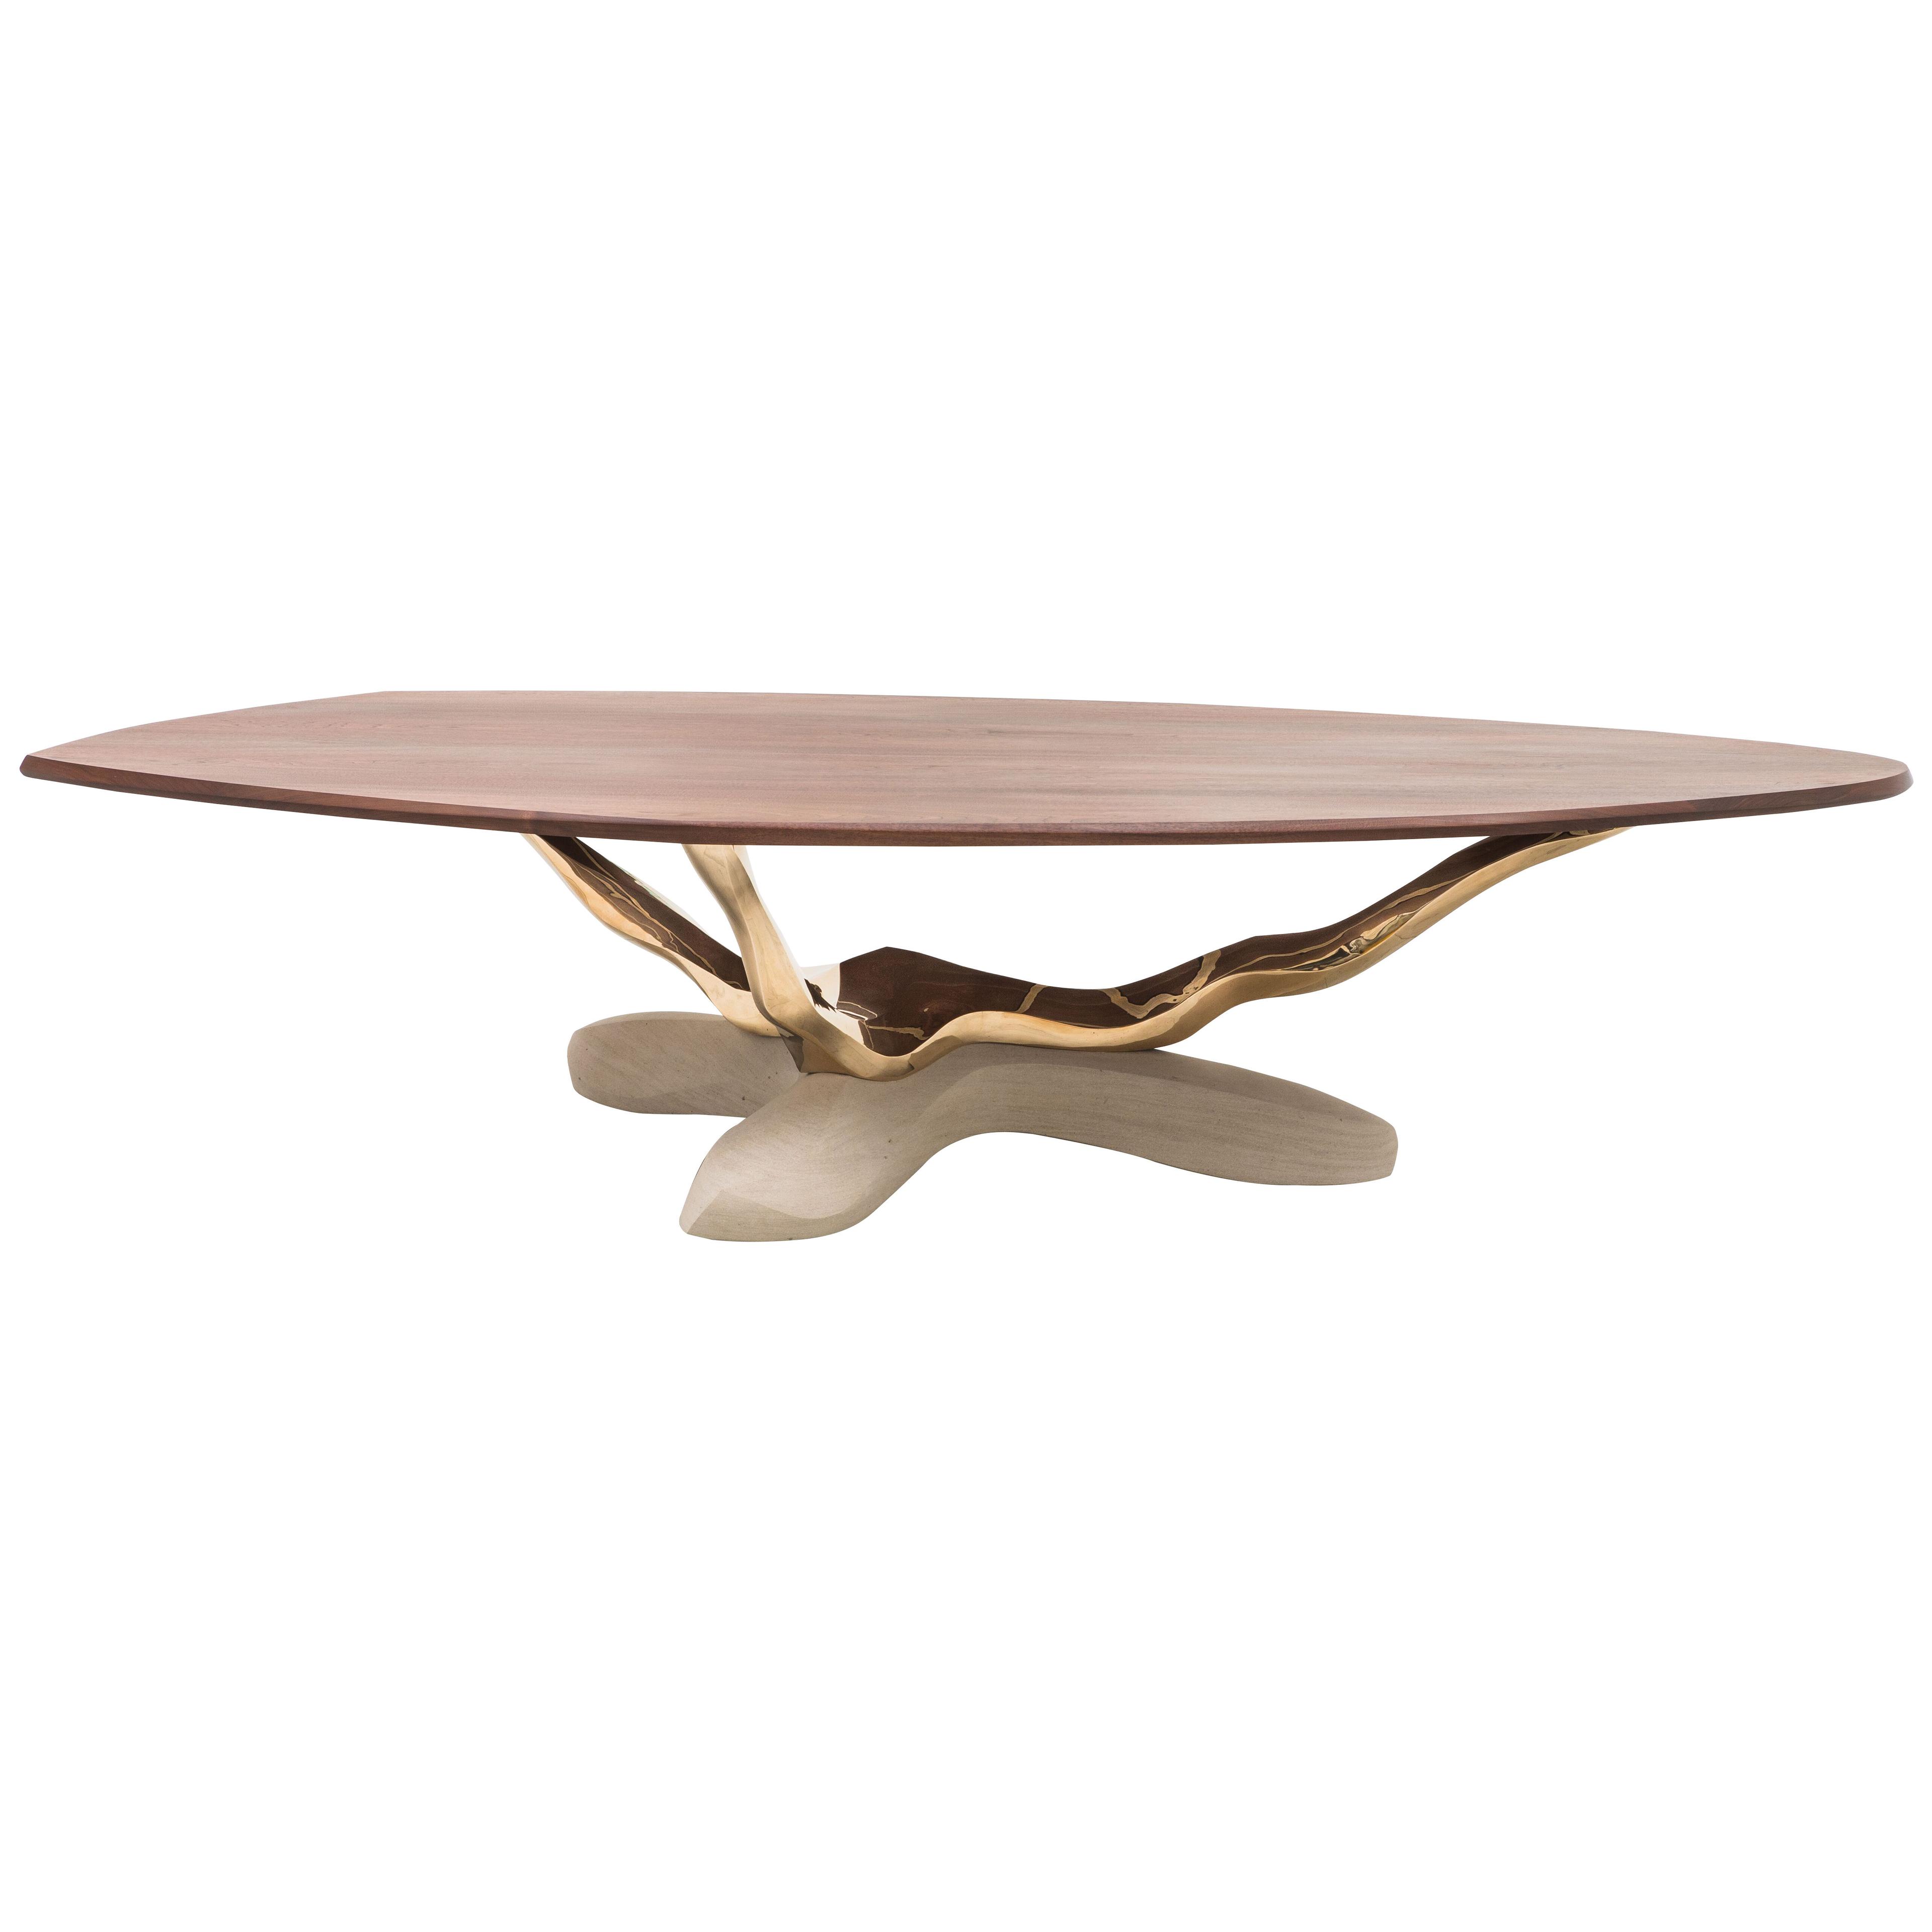 Bronze, Walnut, and Limestone Dining Table